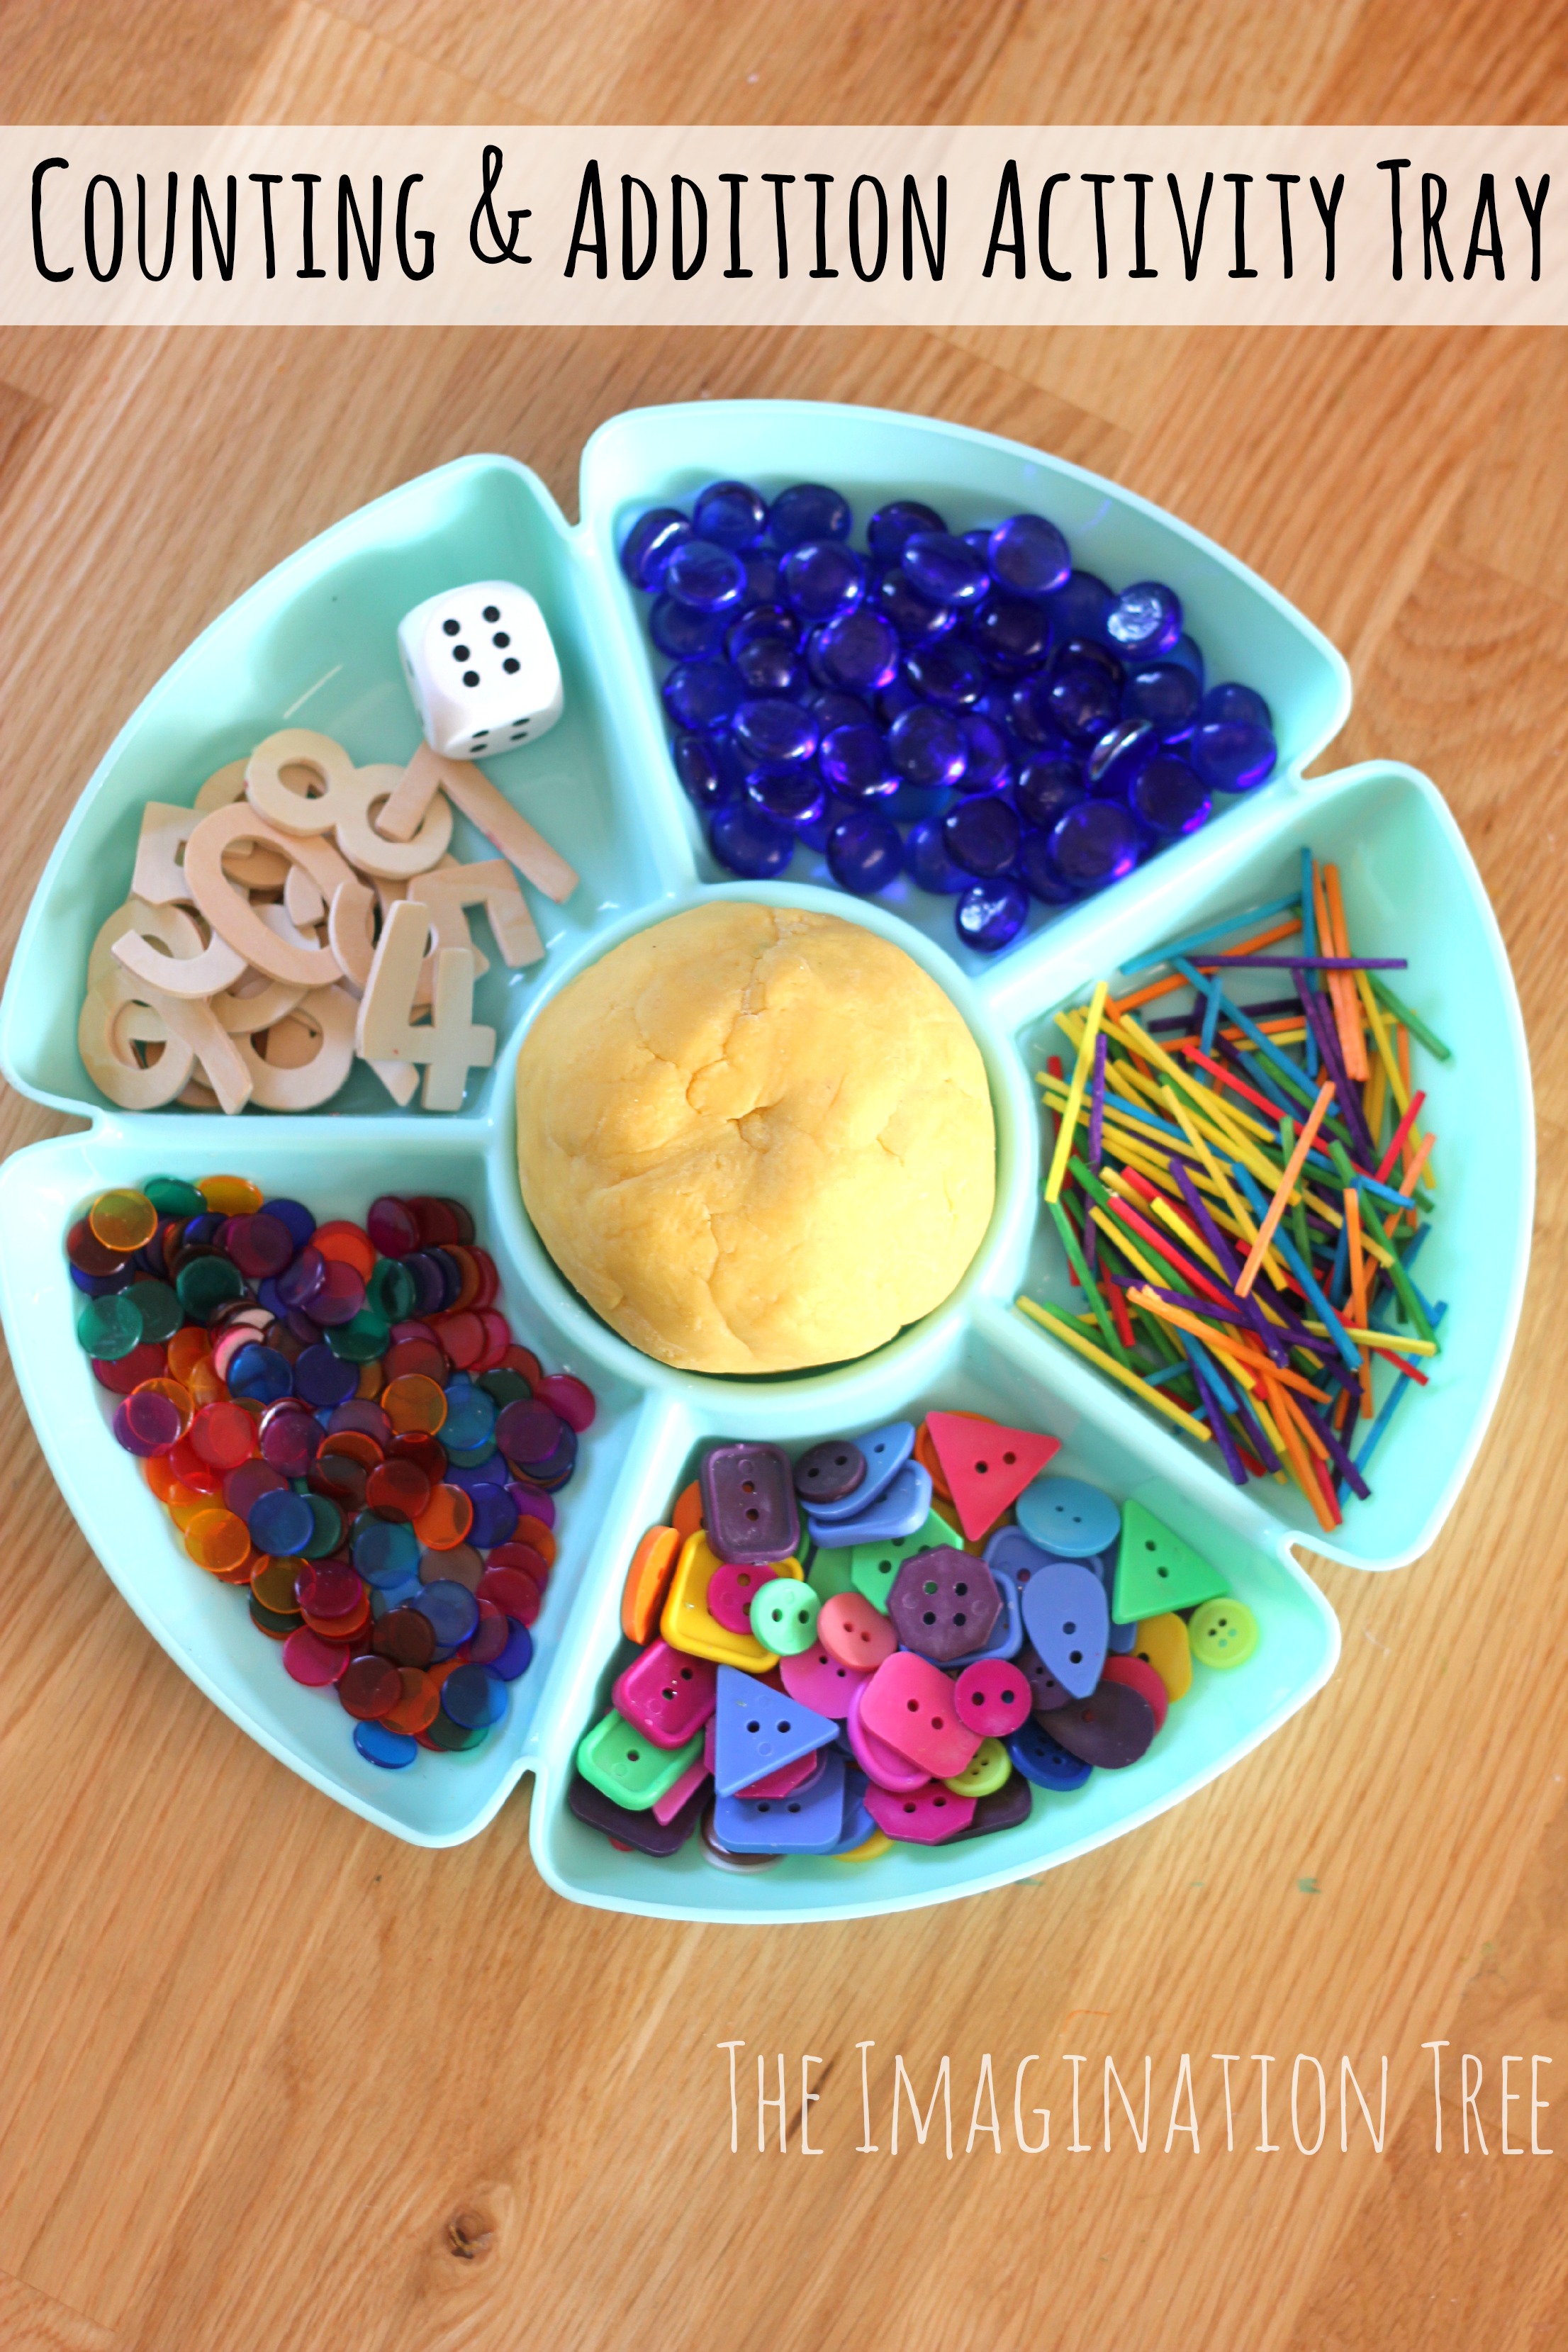 Counting and Addition Activity Tray - The Imagination Tree